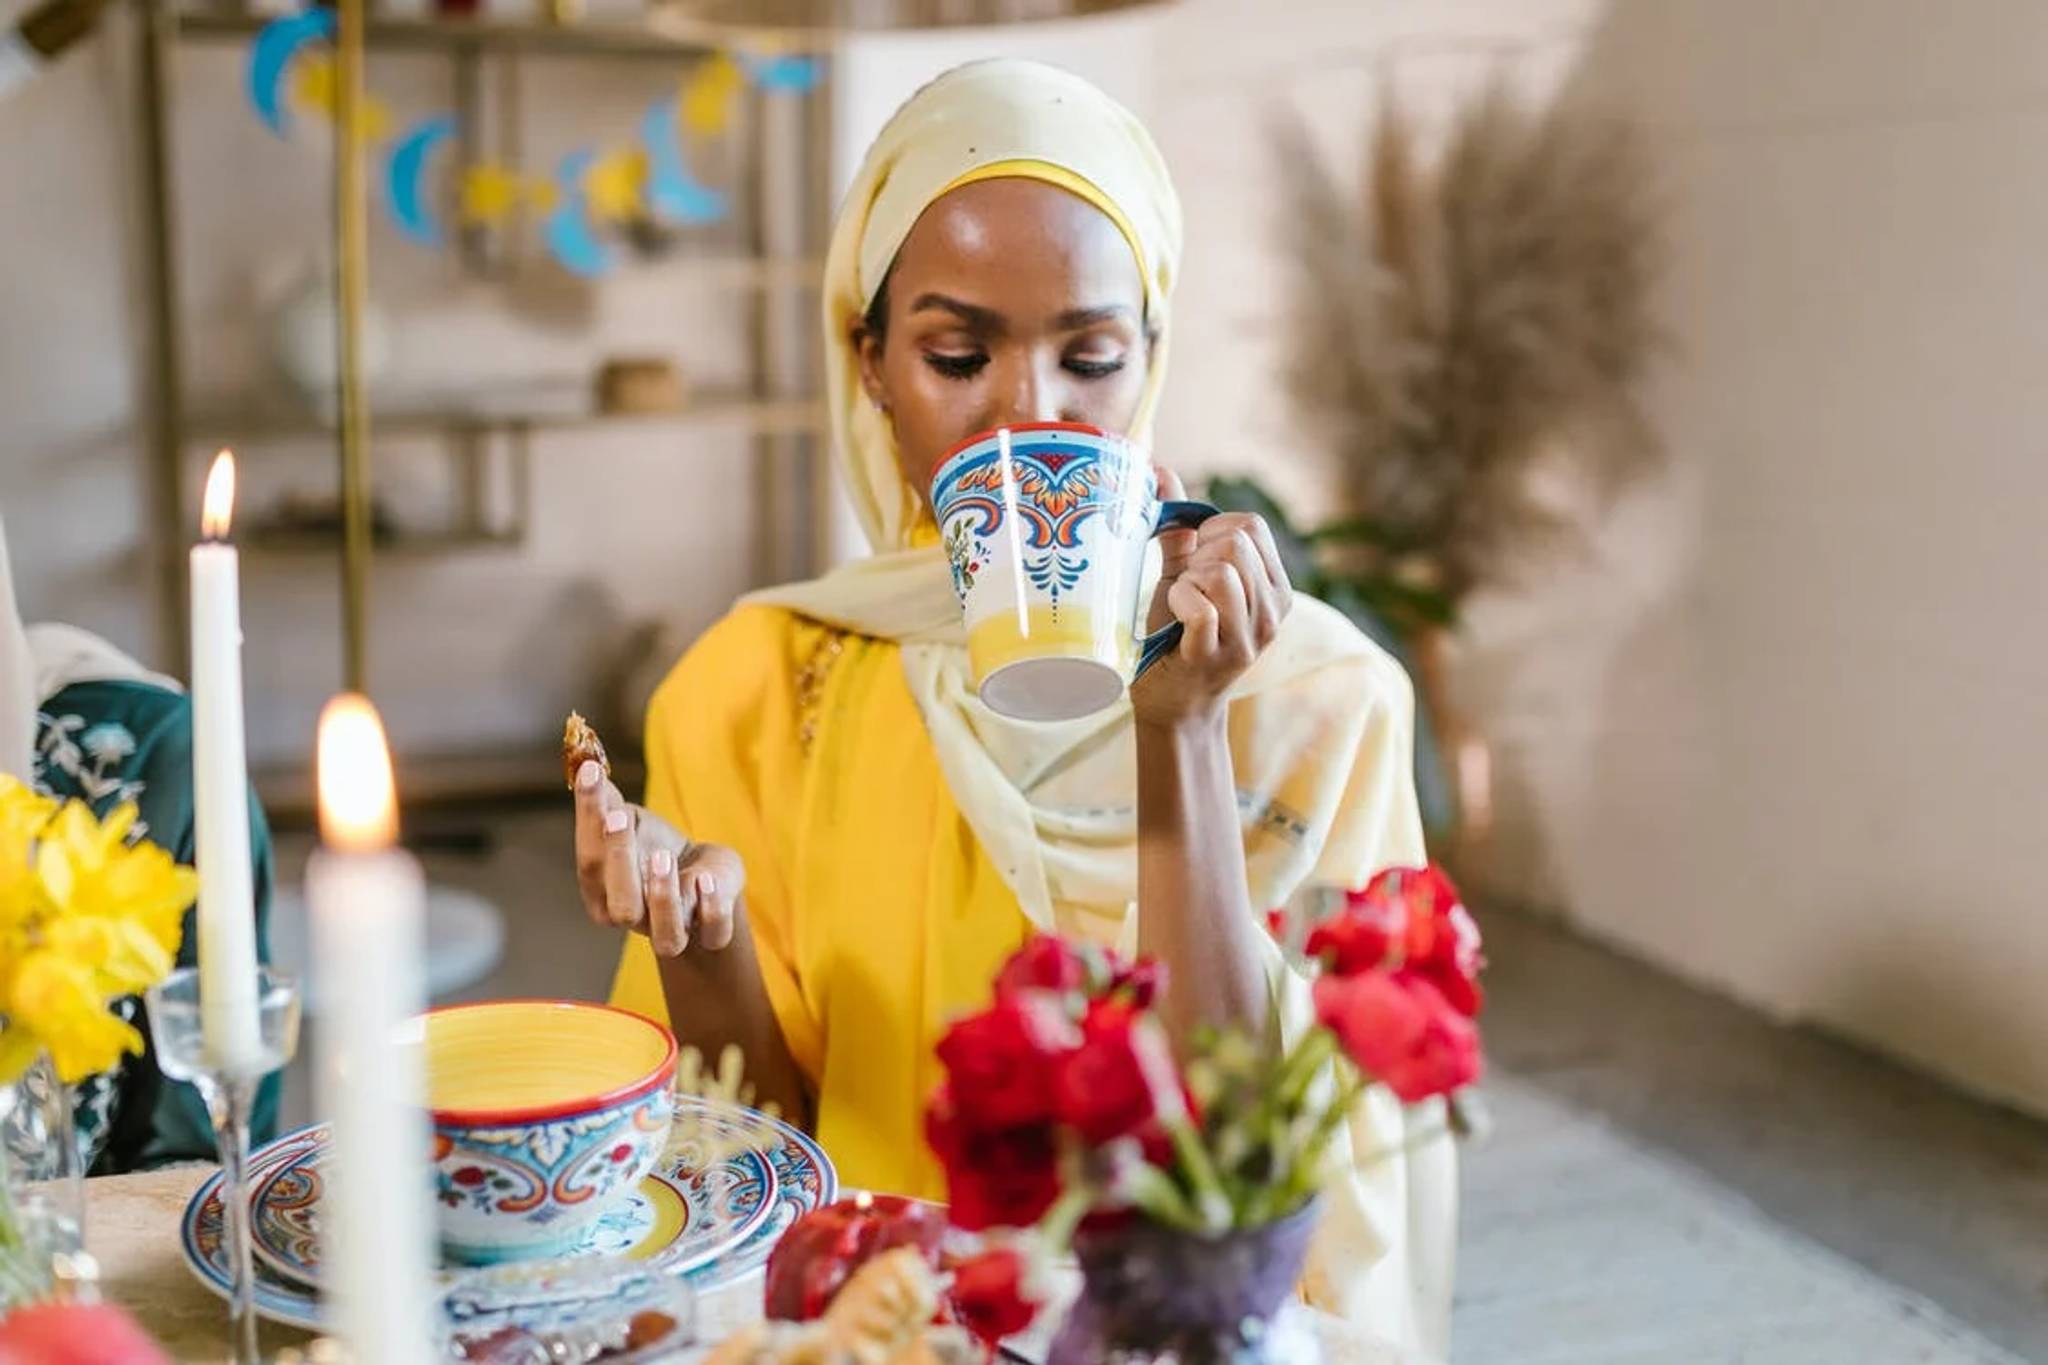 Tesco brings informed authenticity to its Iftar campaign